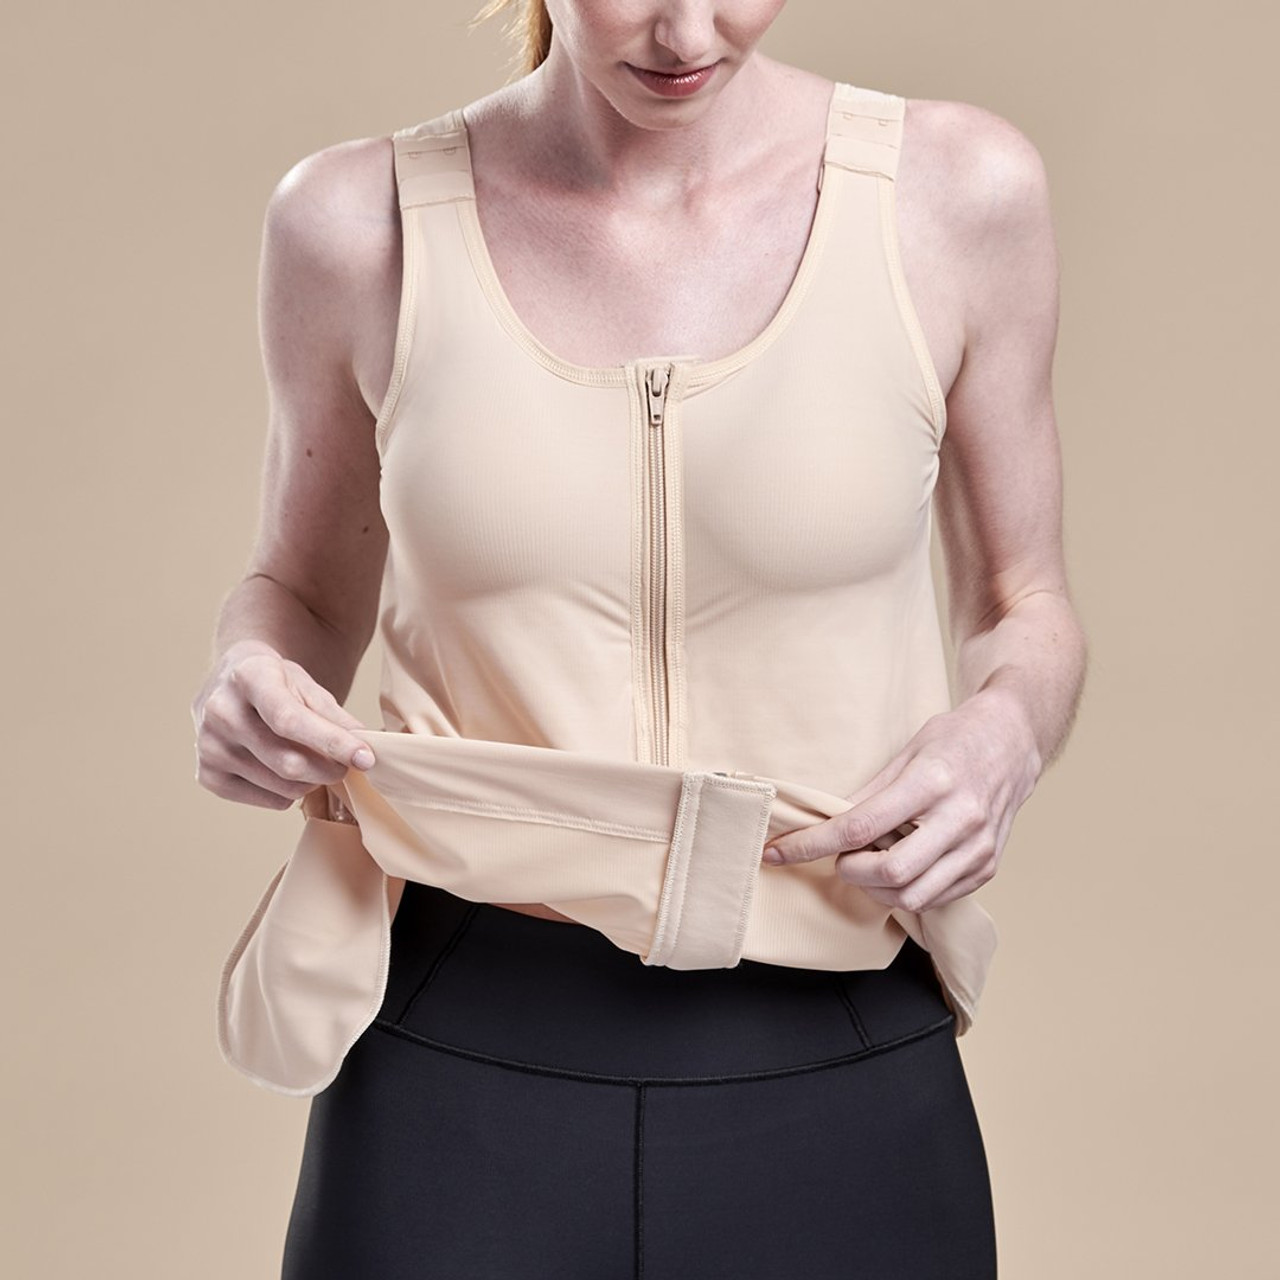 Marena CARESS POCKETED CAMISOLE WITH COMPRESSION BODICE - Mastectomy Shop